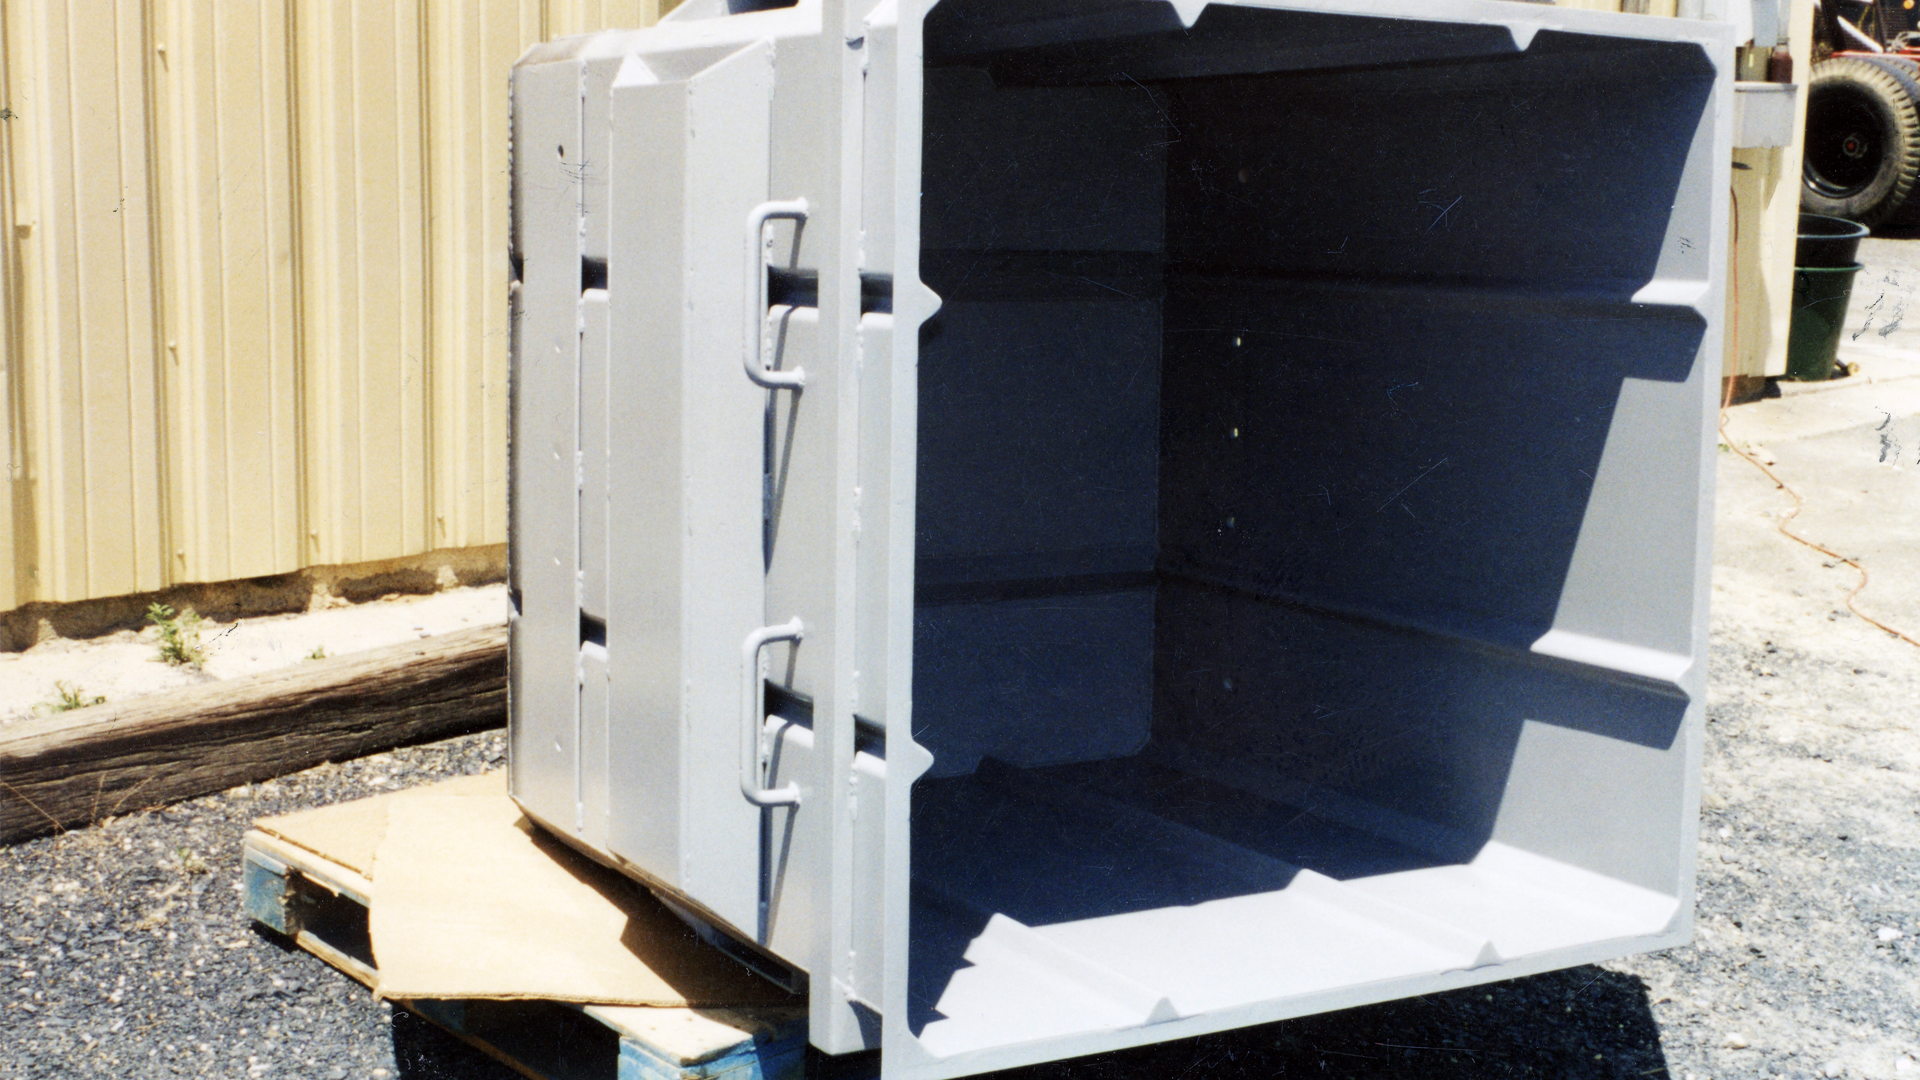 5 Ft. x 5 Ft. x 5 Ft. autoclave bin used to process medical waste for a large national company, coated inside and outside with 3 – 5 mils of PFA Teflon coating.